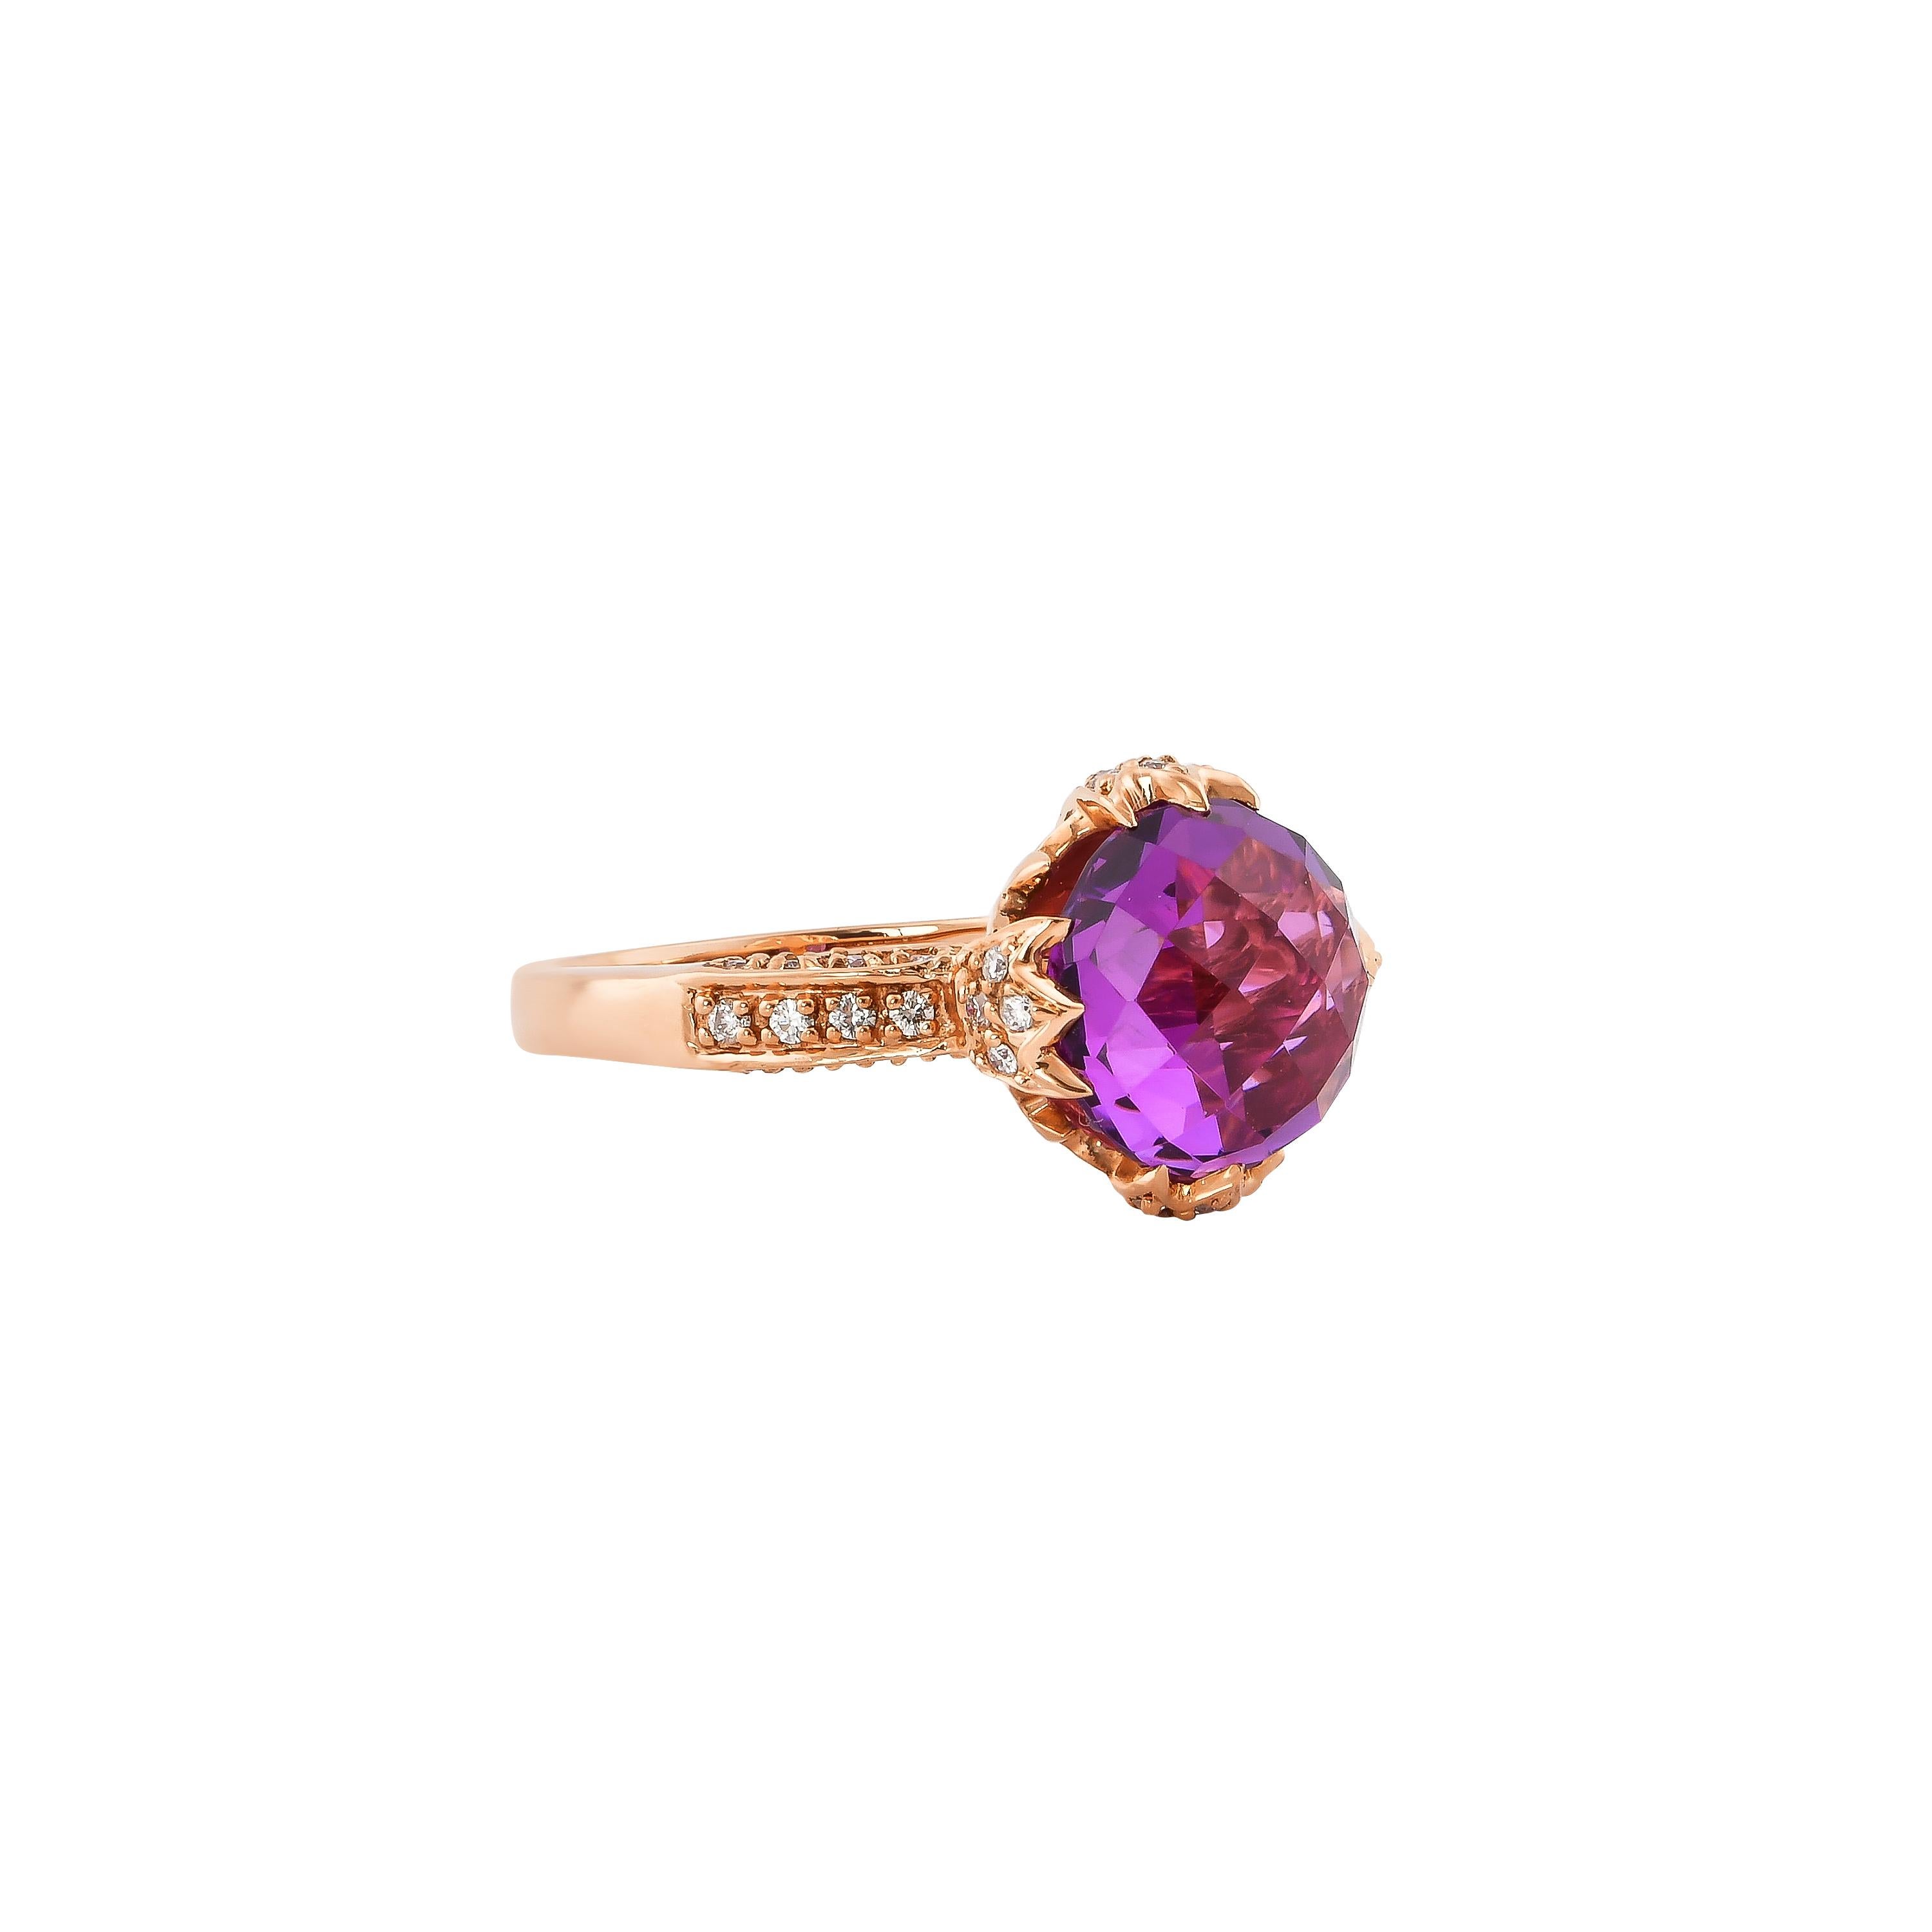 Sunita Nahata presents a collection of alluring amethyst cocktail rings. Amethysts are particularly known to bring powerful energies to Aquarians or those born in February. In general it is said to calm and de-stress wearers, and alleviate all